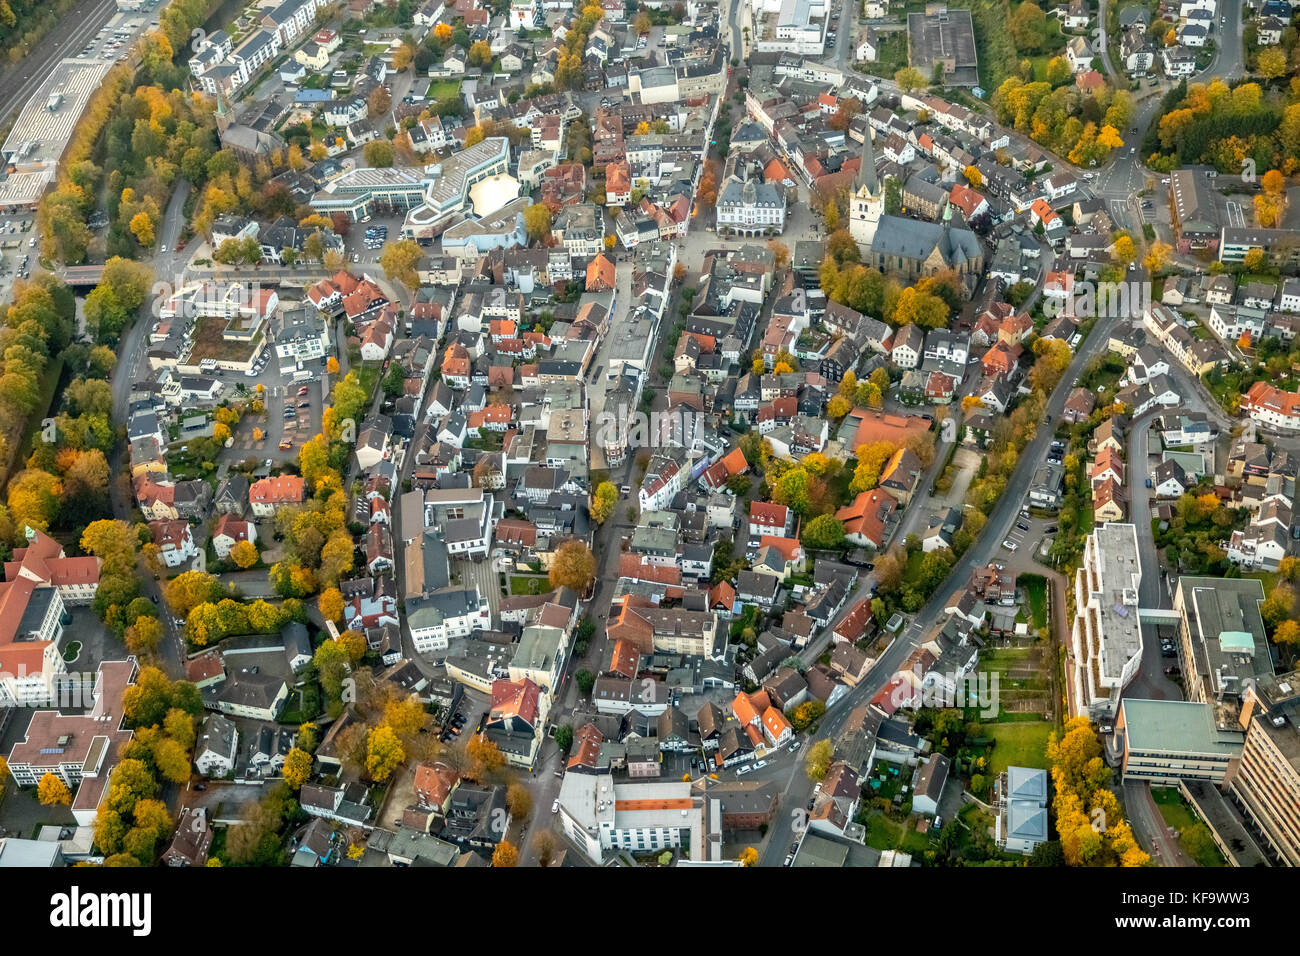 Downtown Menden, City Center, Old Town Hall, New Town Hall, Menden, Sauerland, North Rhine-Westphalia, Germany, Europe, Aerial View, Aerial, aerial ph Stock Photo